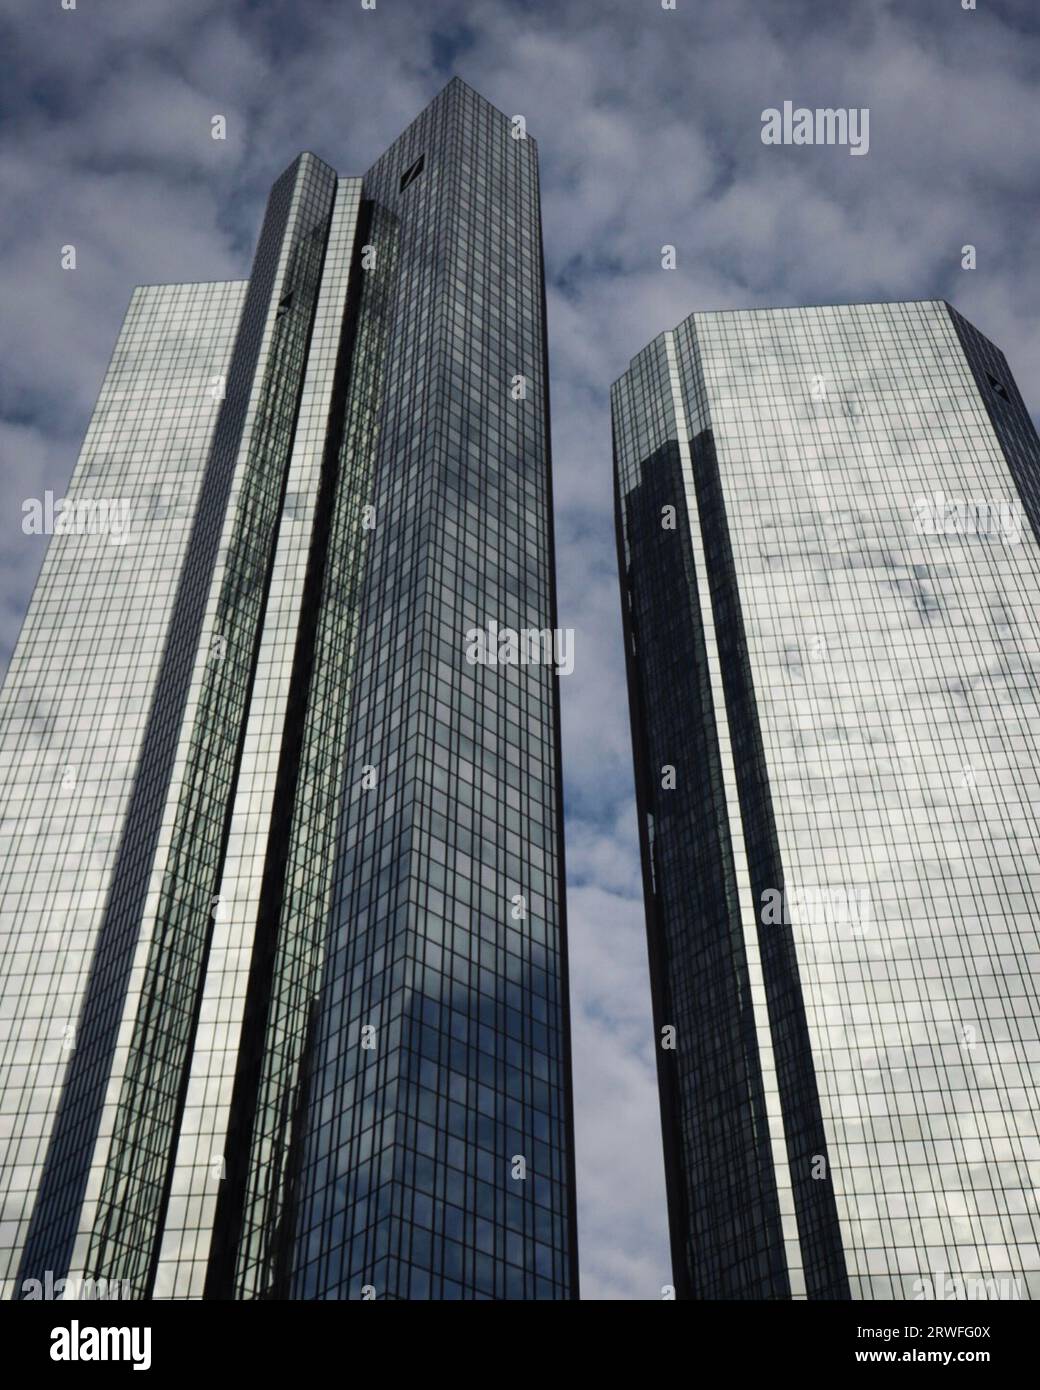 Crazy Perspective on the Skyscrapers of Frankfurt Stock Photo